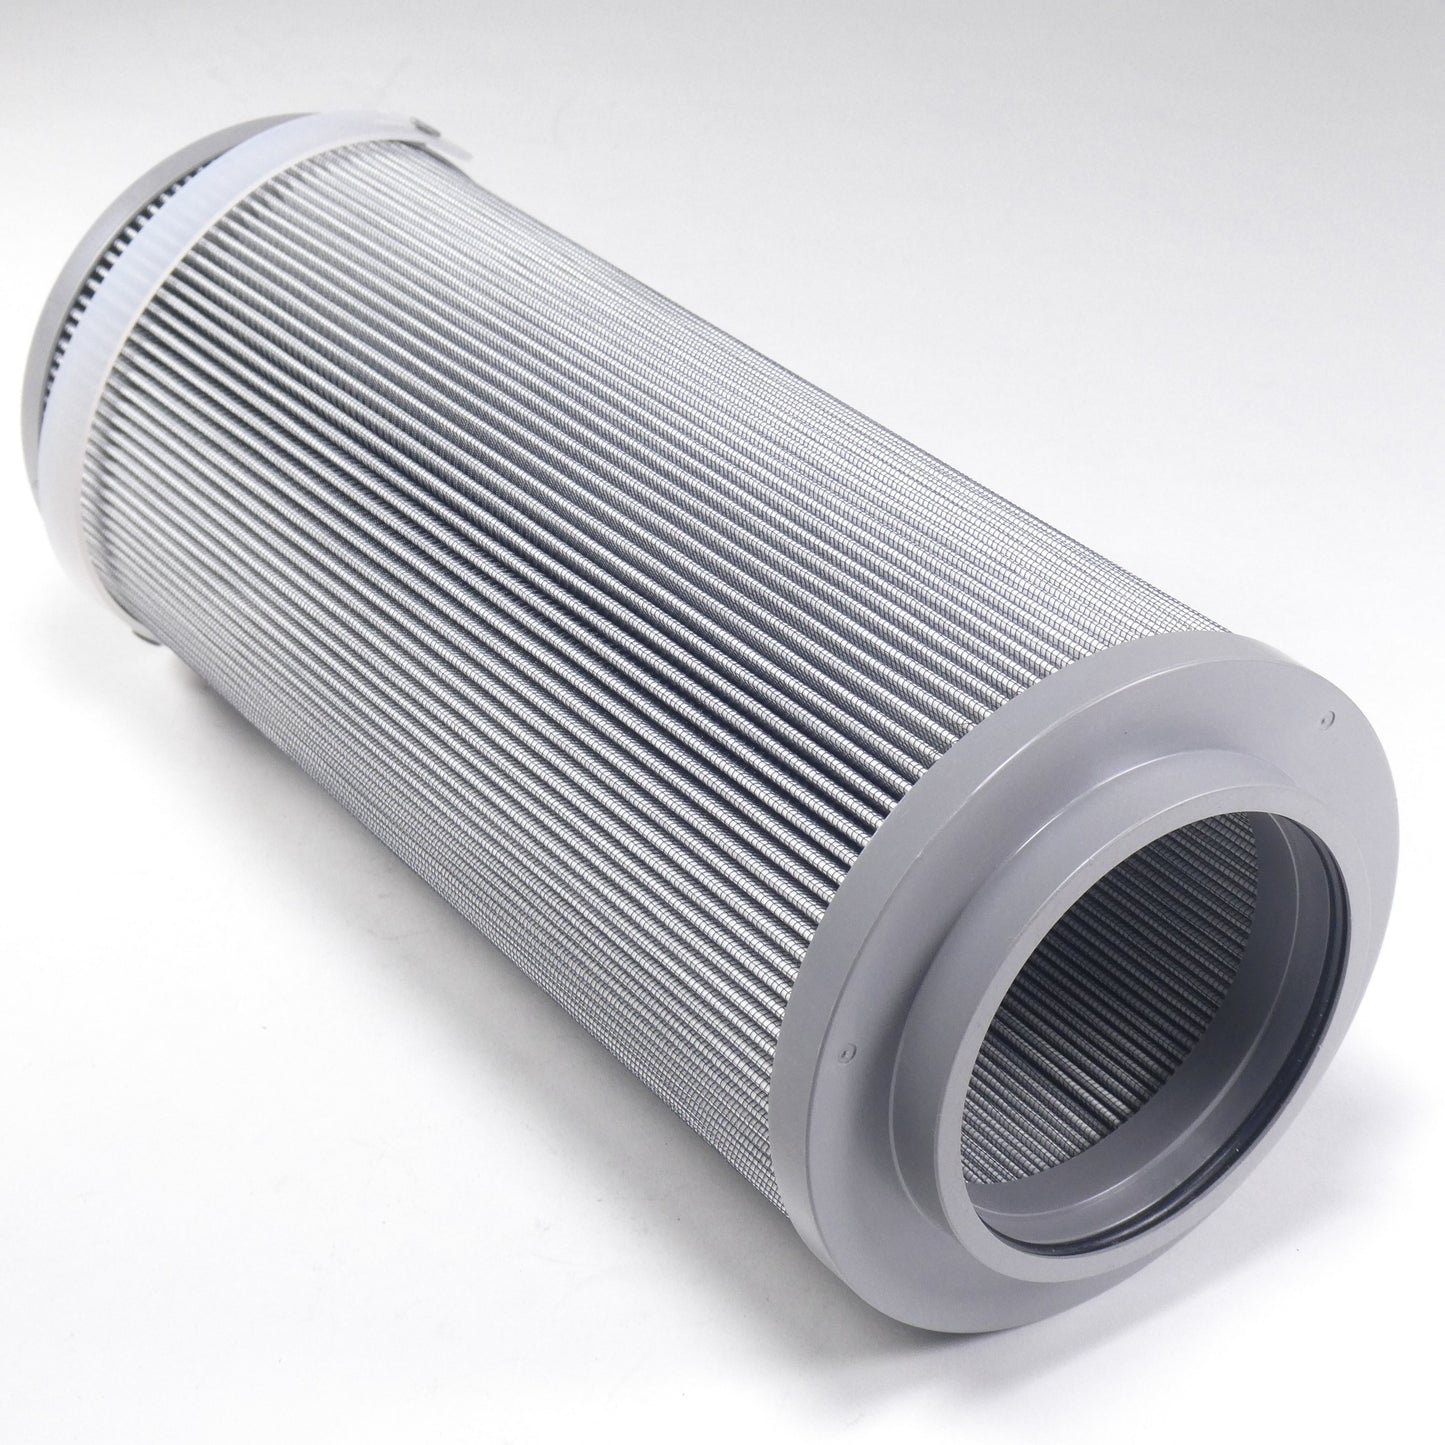 Hydrafil Replacement Filter Element for Kaydon KMP8314A12B16